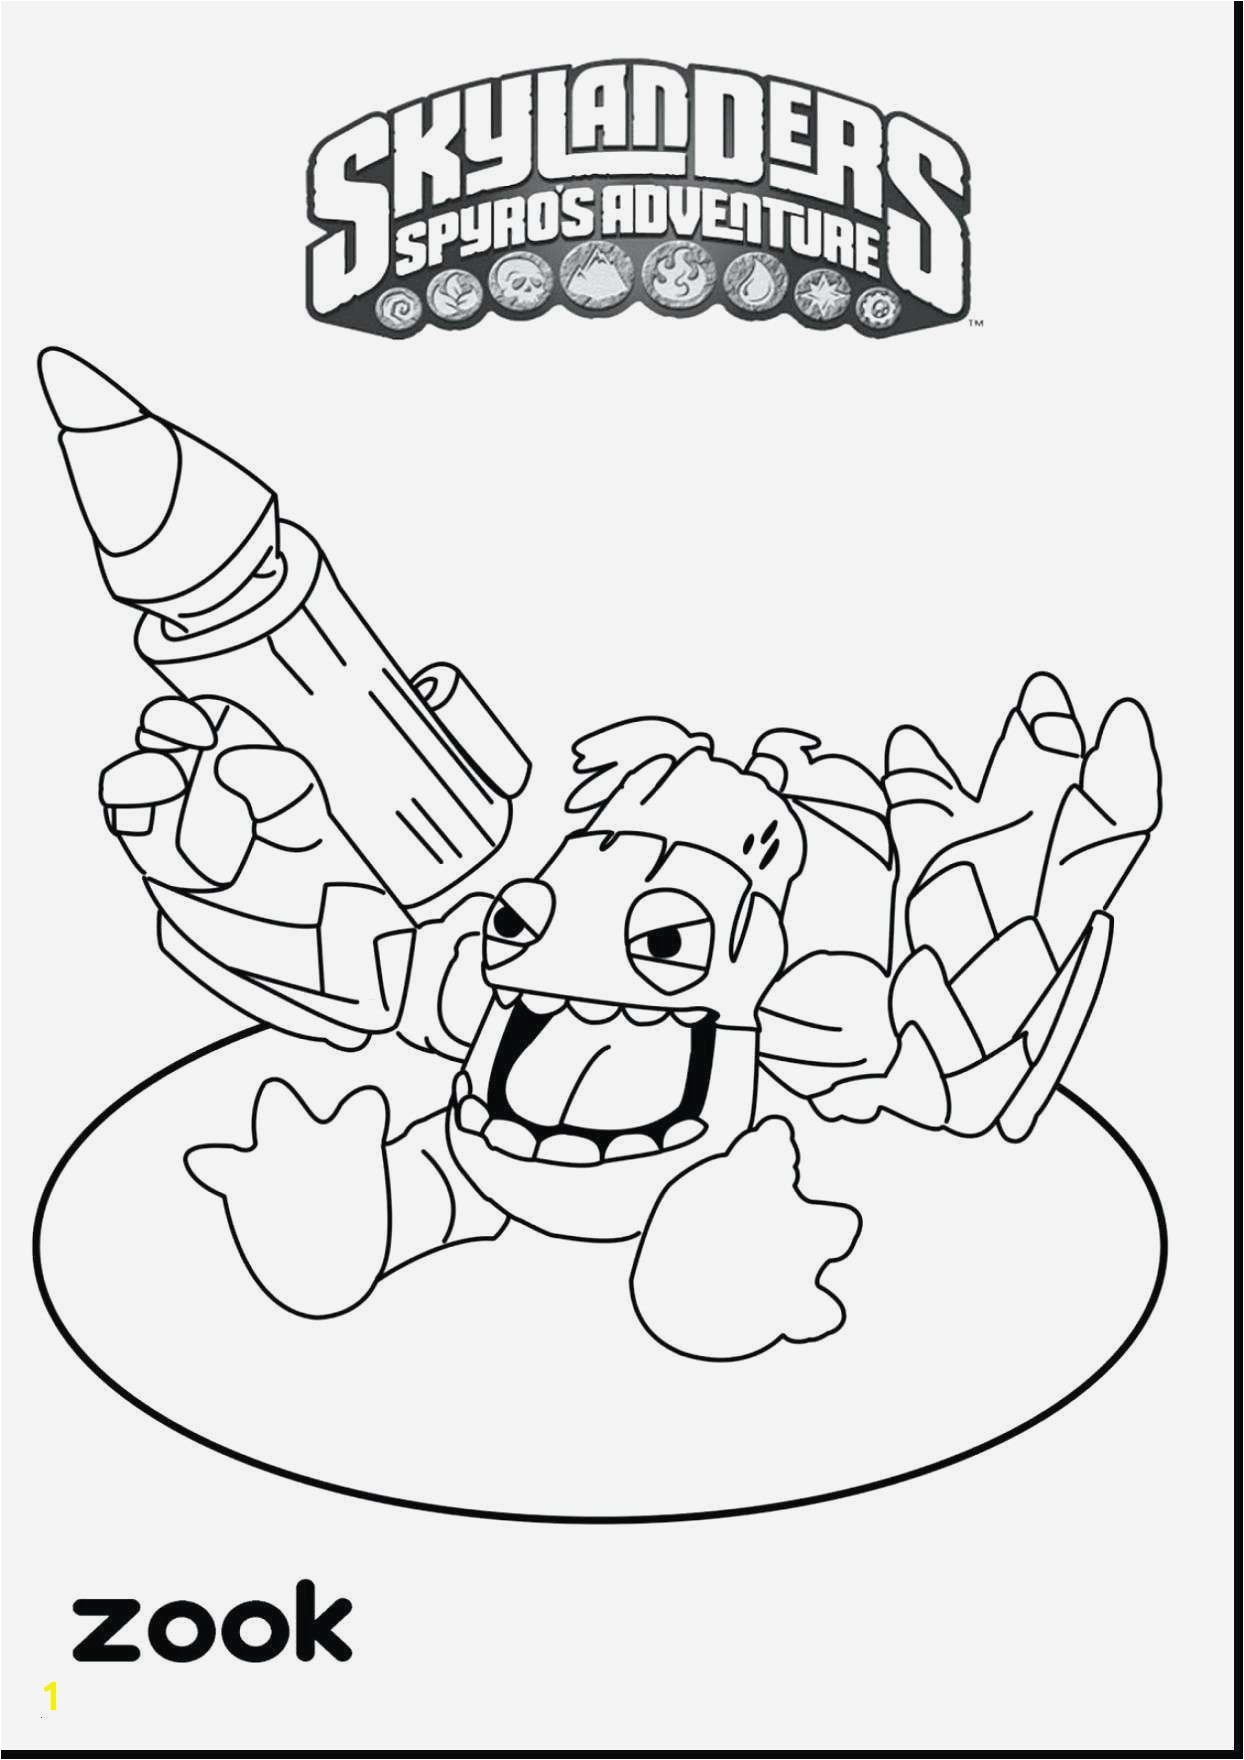 Saving Money Coloring Pages 12 Unique Pretty Little Liars Printable Coloring Pages